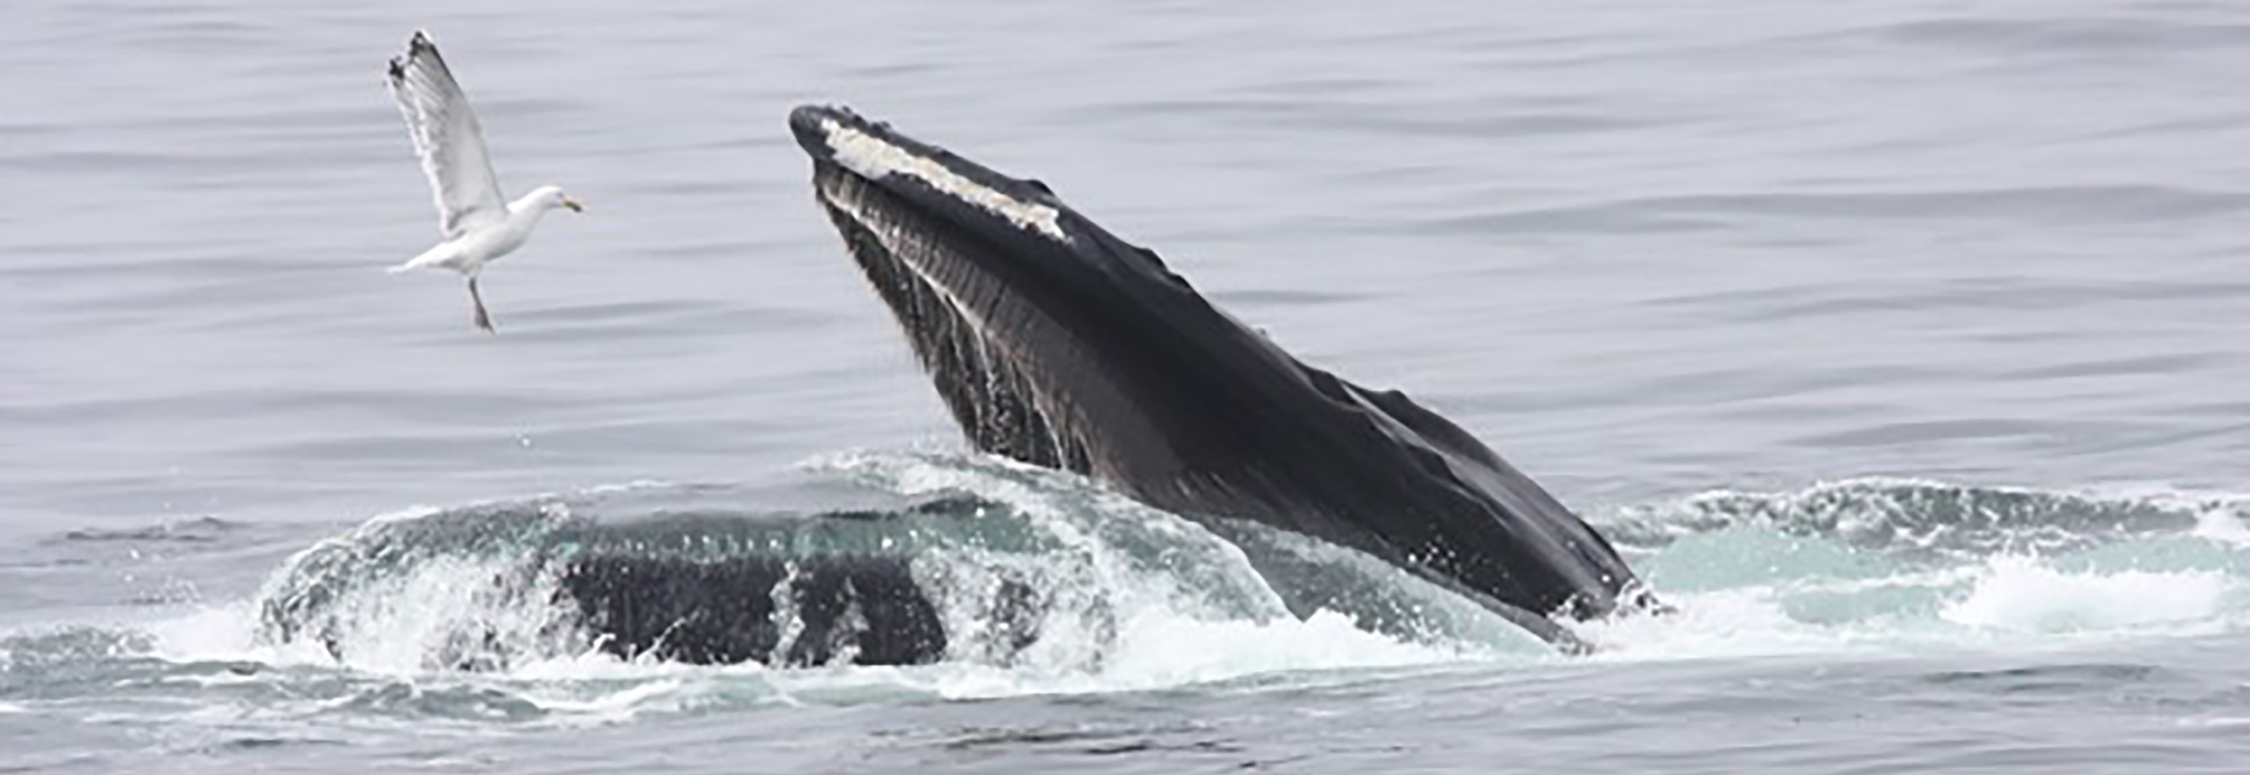 Humpback whale

By Dominic Sherony - Humpback Whale with Herring Gull Stellwagen Banks Marine SanctuaryUploaded by Magnus Manske, CC BY-SA 2.0, https://commons.wikimedia.org/w/index.php?curid=21239926